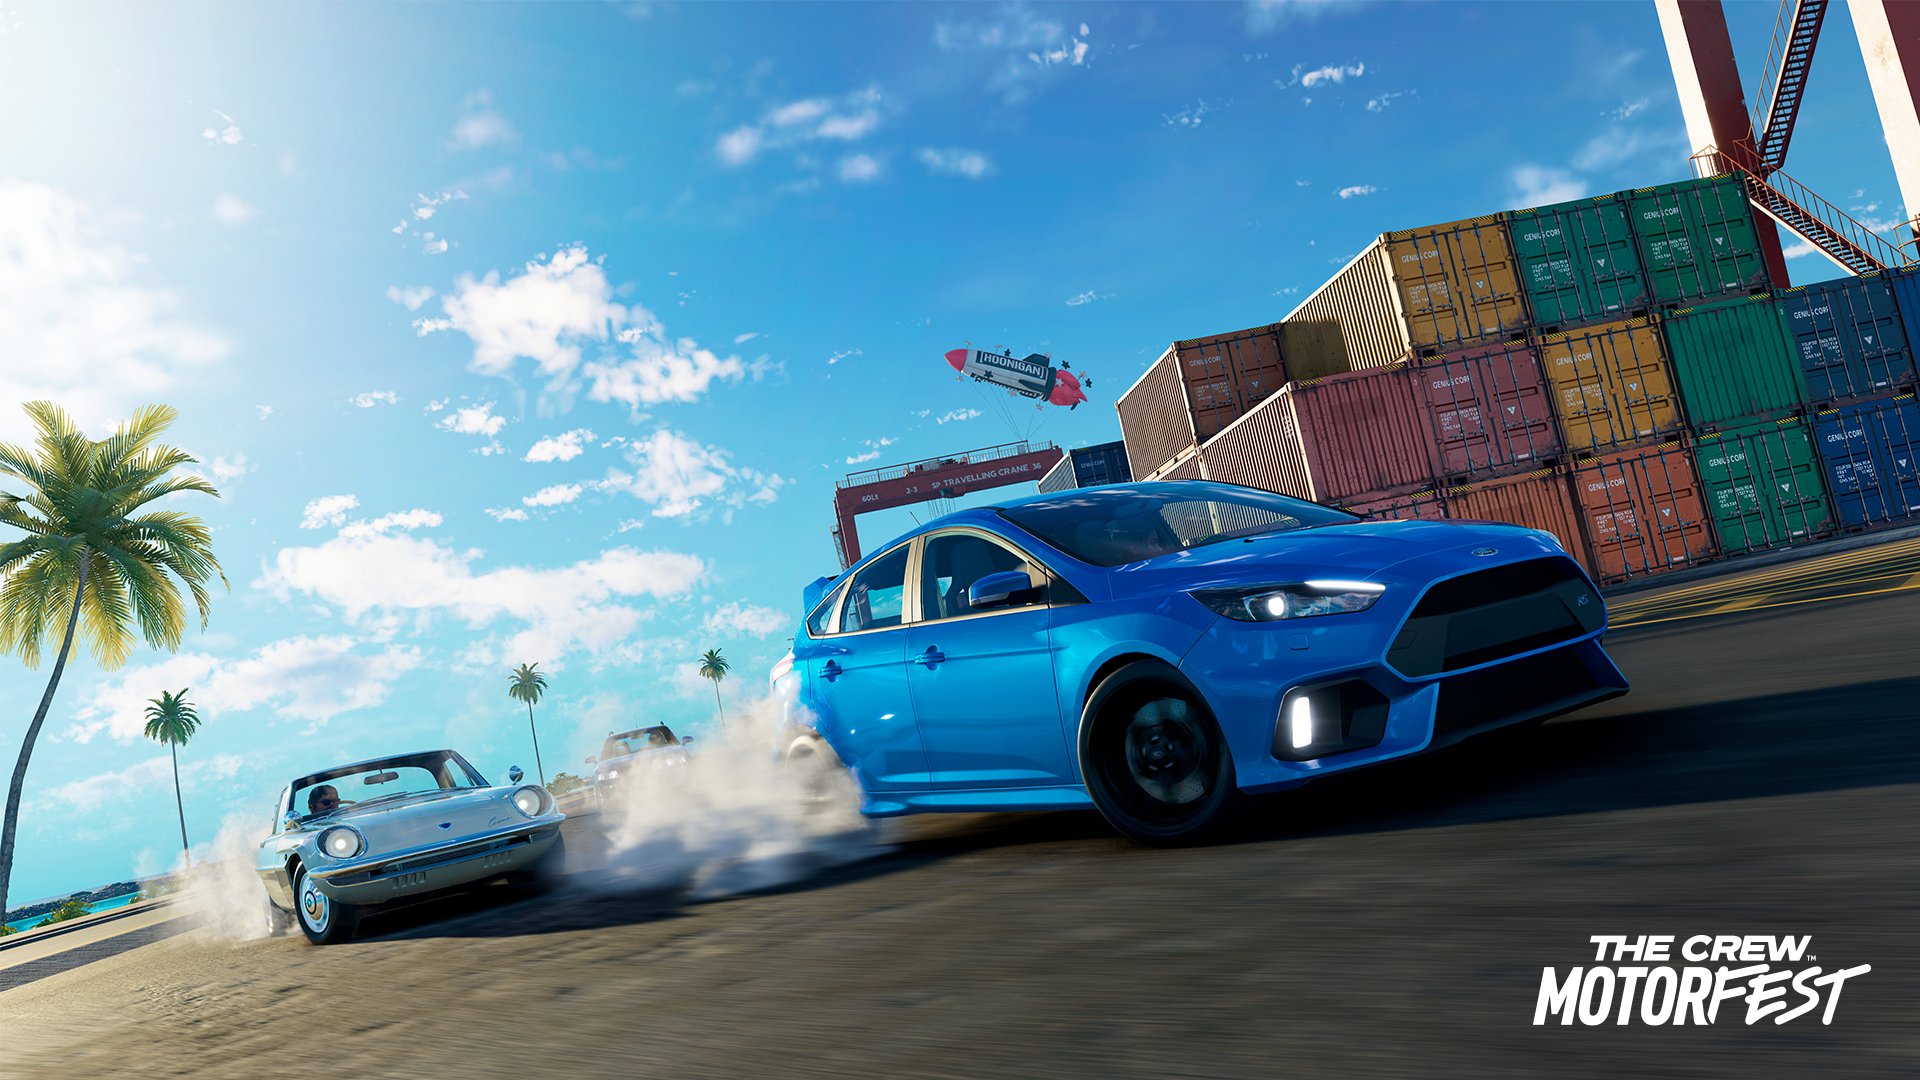 The Crew Motorfest free trial: How to play, dates, content, more